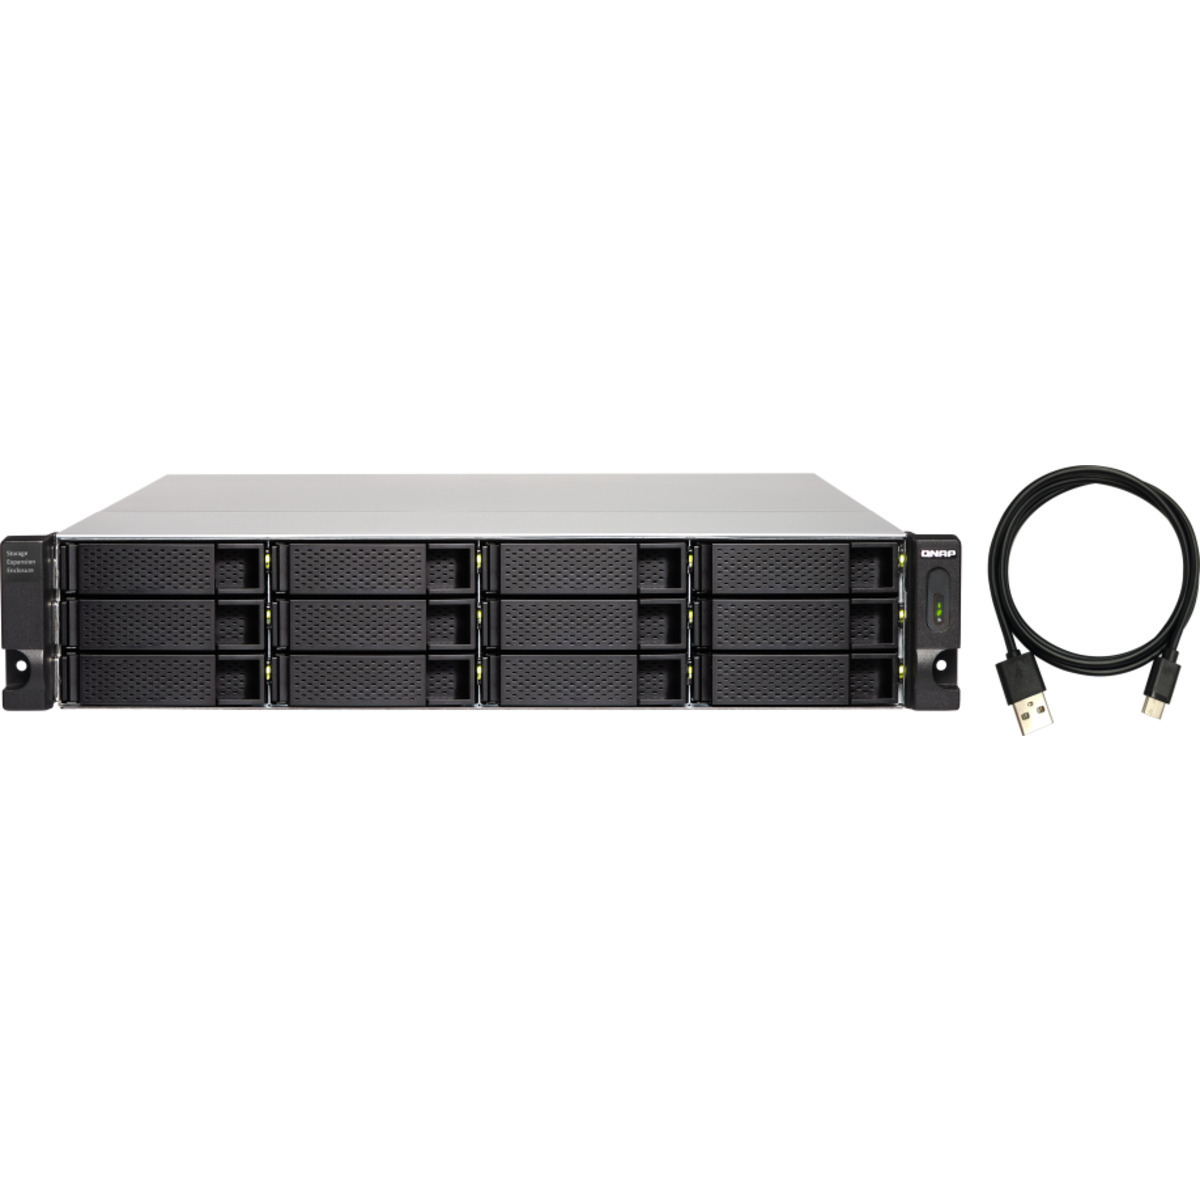 buy $7810 QNAP TL-R1200C-RP External Expansion Drive 264tb RackMount Expansion Enclosure 12x22000gb Western Digital Red Pro WD221KFGX 3.5 7200rpm SATA 6Gb/s HDD NAS Class Drives Installed - Burn-In Tested - ON SALE - nas headquarters buy network attached storage server device das new raid-5 free shipping simply usa TL-R1200C-RP External Expansion Drive